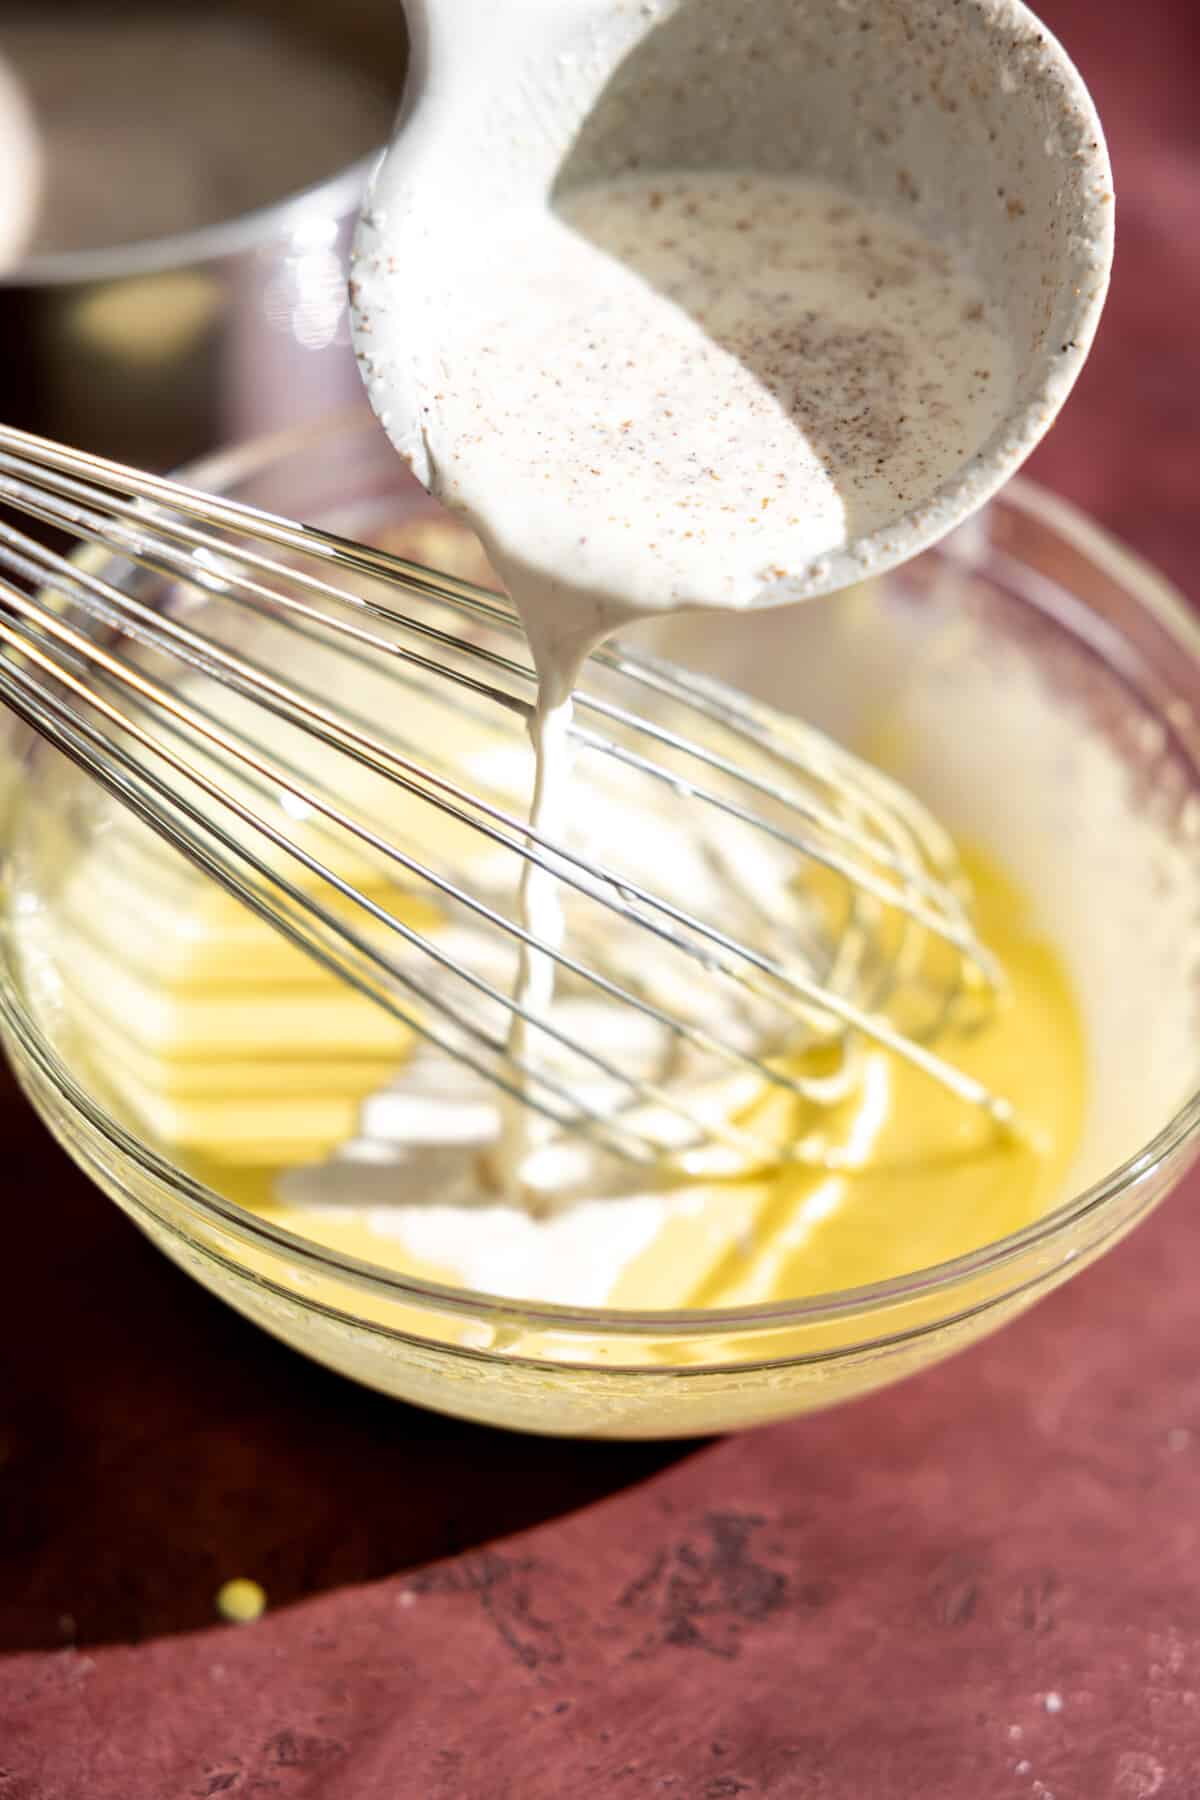 Warm cream being poured into egg yolks to temper.